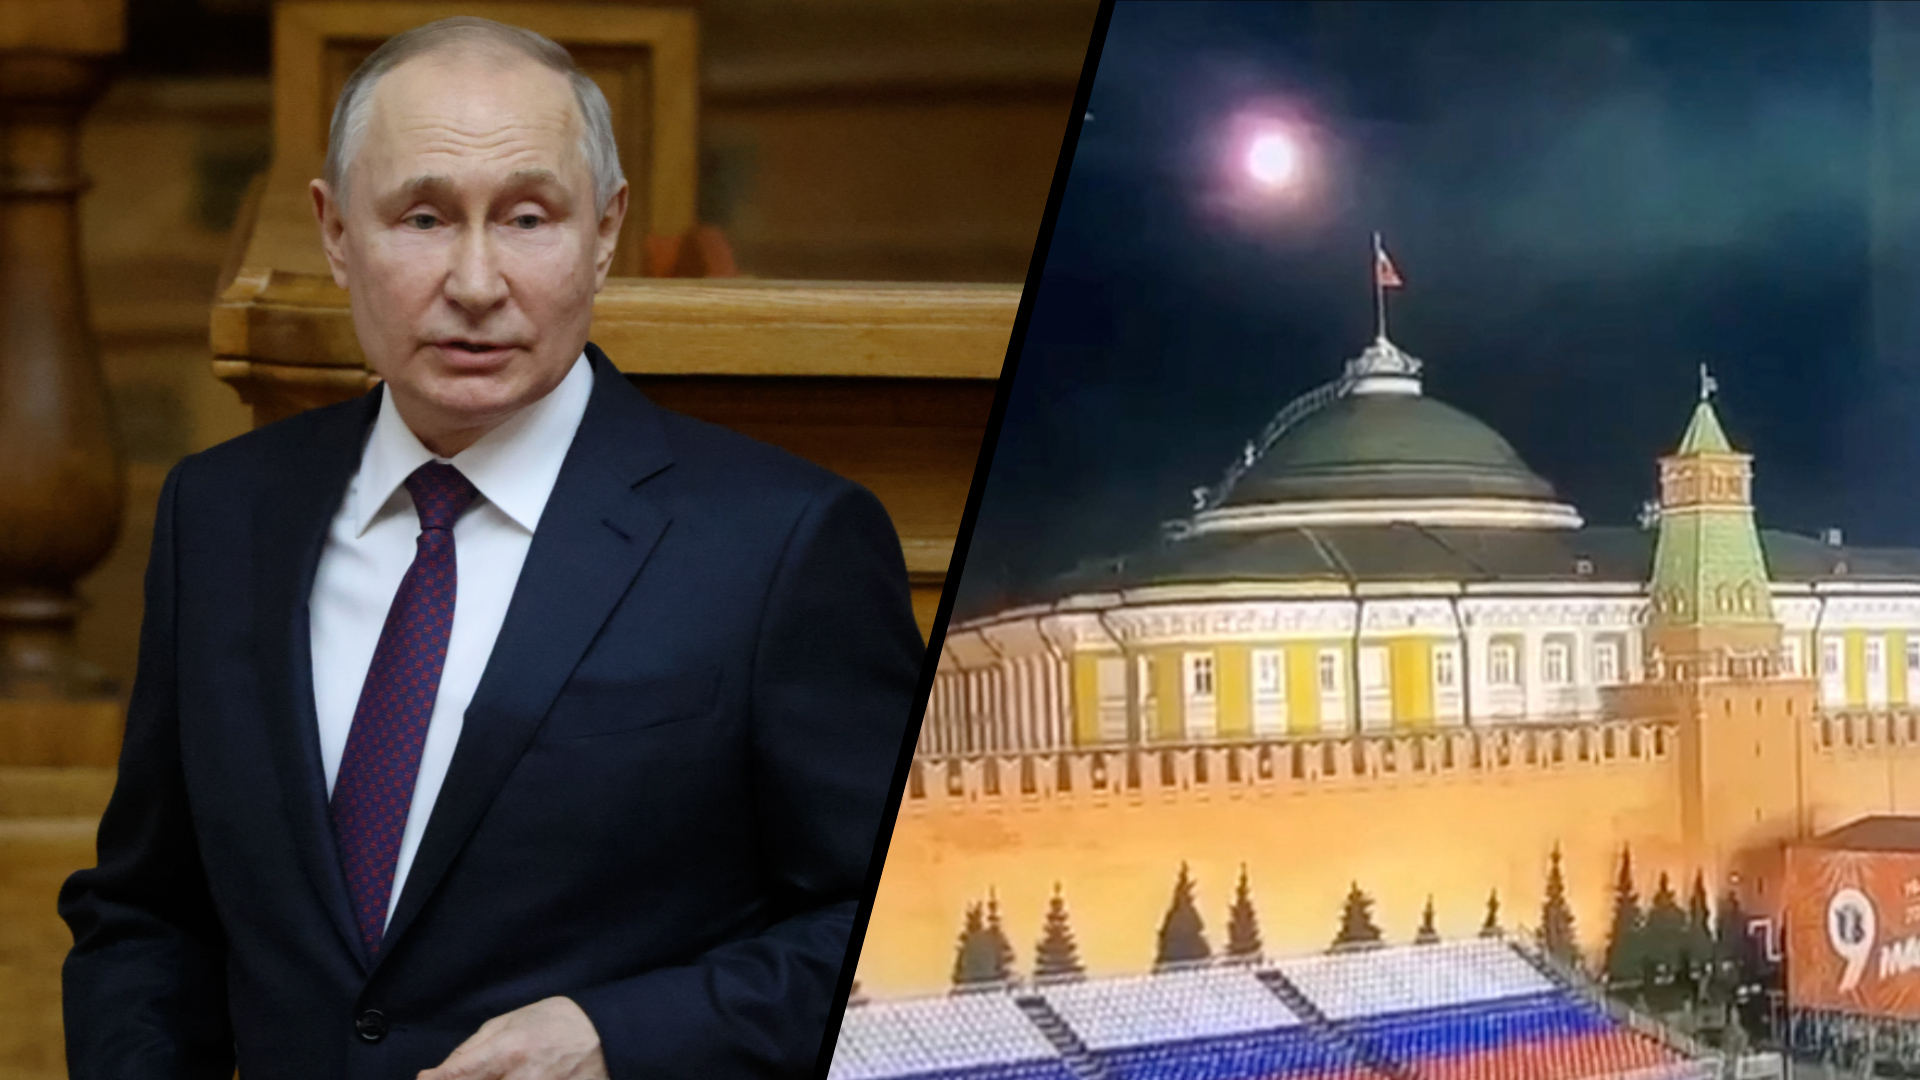 Russian officials say that several drones intercepted over the Kremlin in recent days were attempts to assassinate President Vladimir Putin.